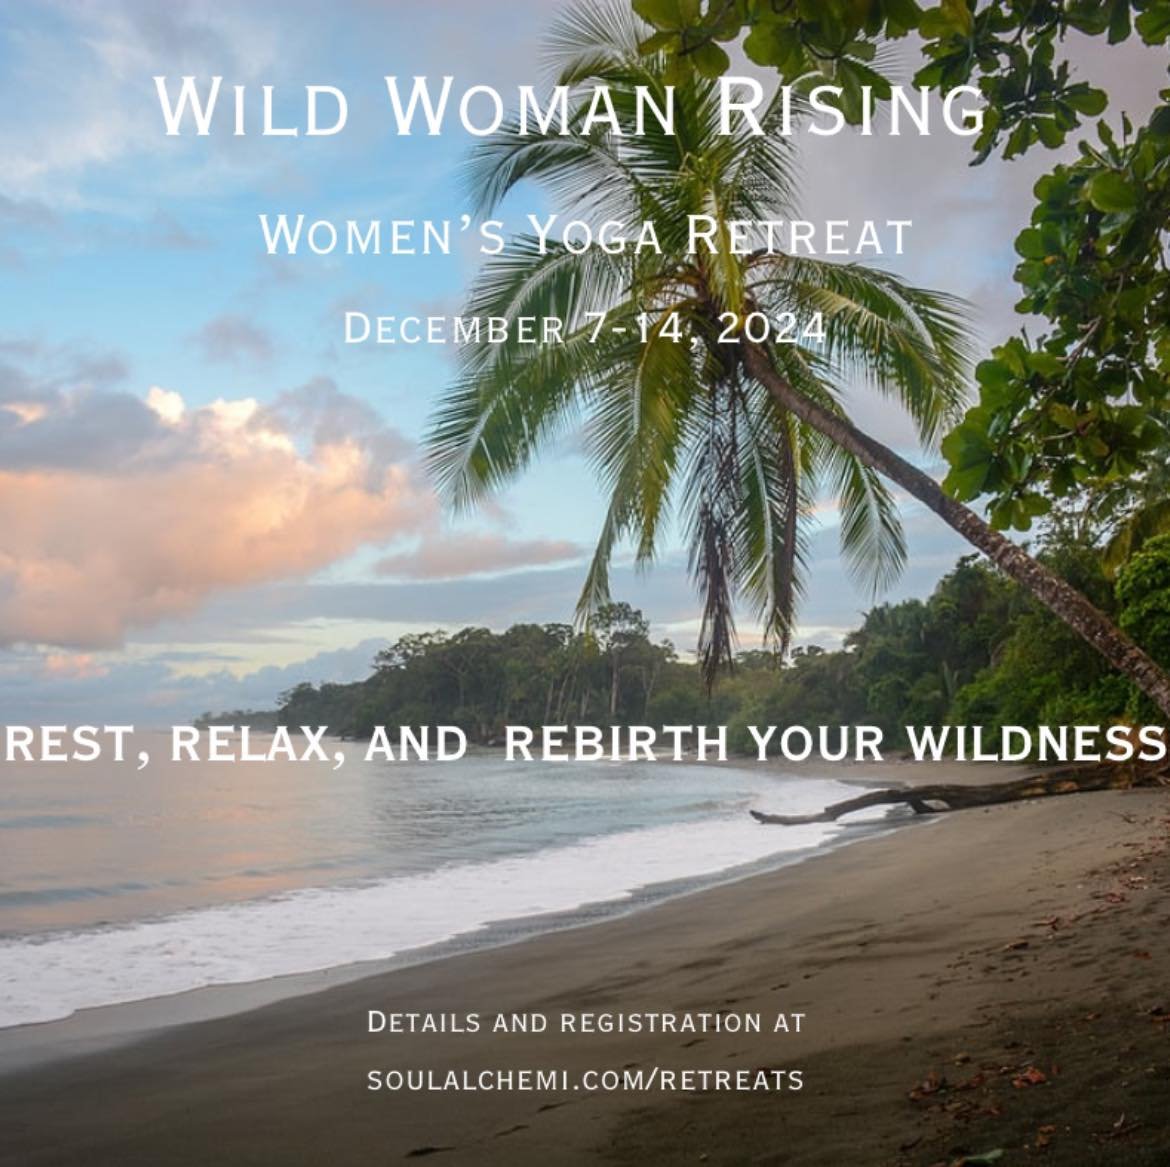 The purpose of retreating is to take some time away from one&rsquo;s ordinary reality and step into a time and space where stillness can greet your mind, body, and soul.

On this women&rsquo;s only retreat we will move from the exterior to the interi